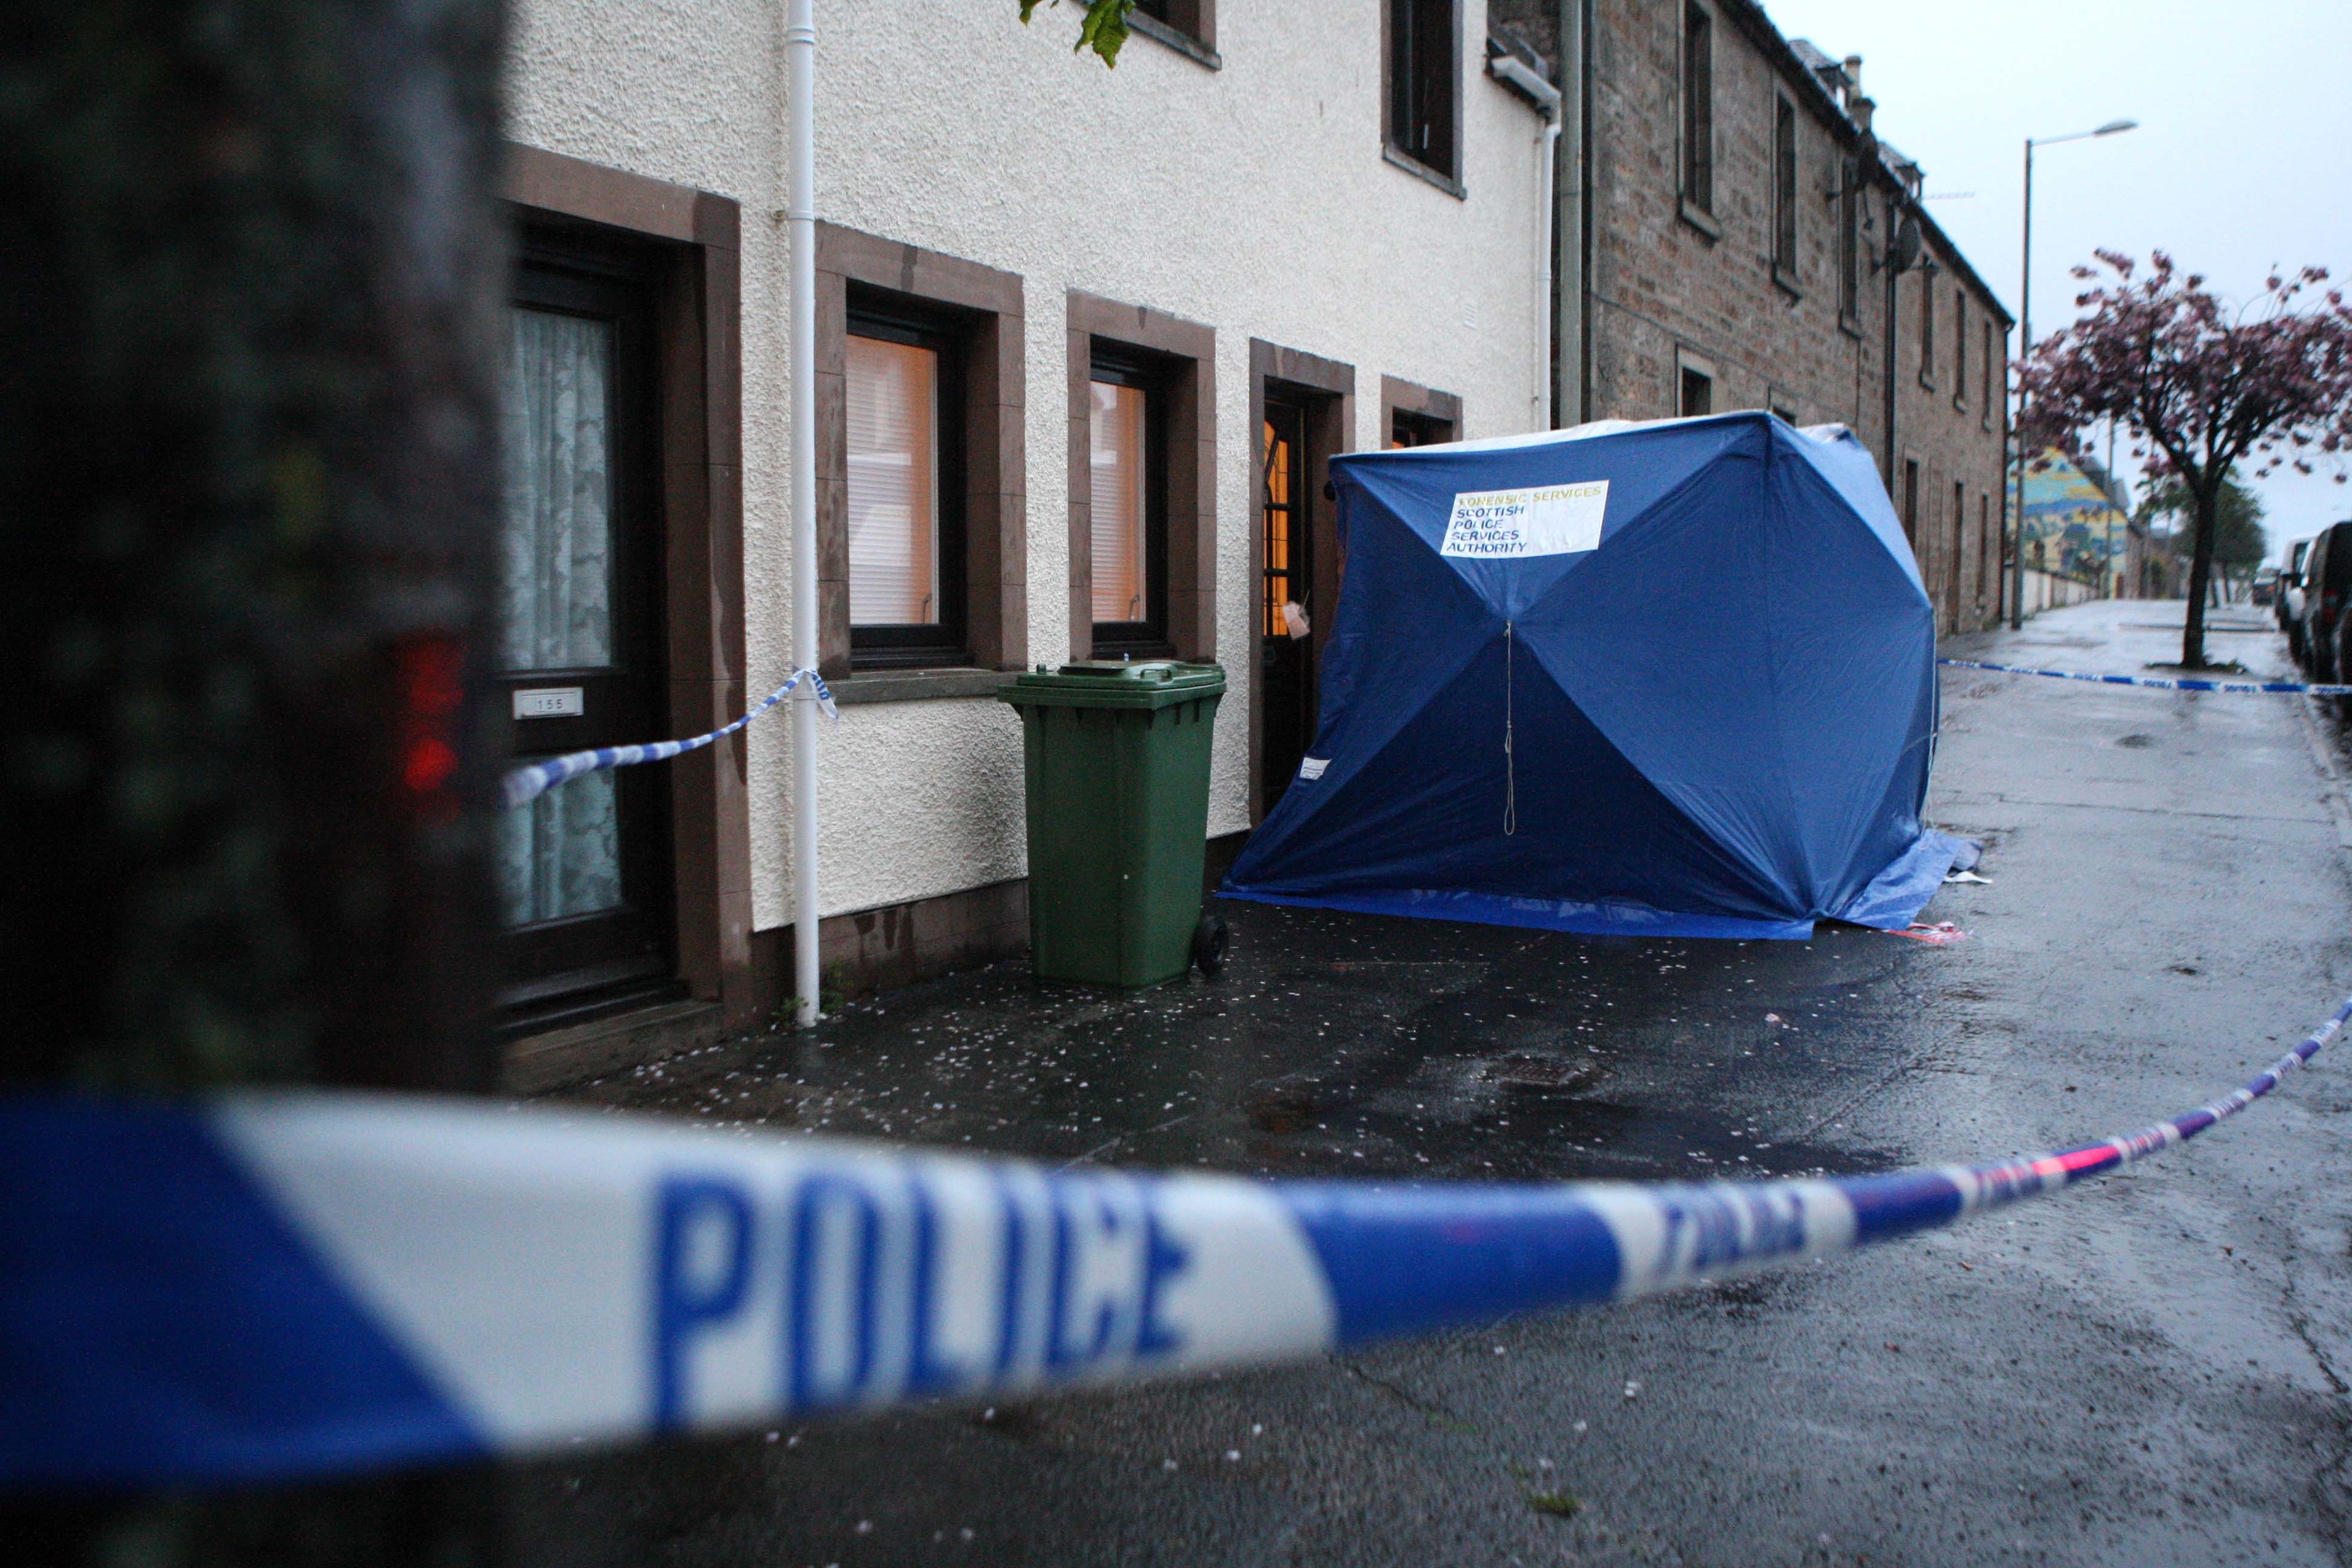 Scene of a stabbing outside number 157 on the high street in Invergorden. Picture: Andrew Smith